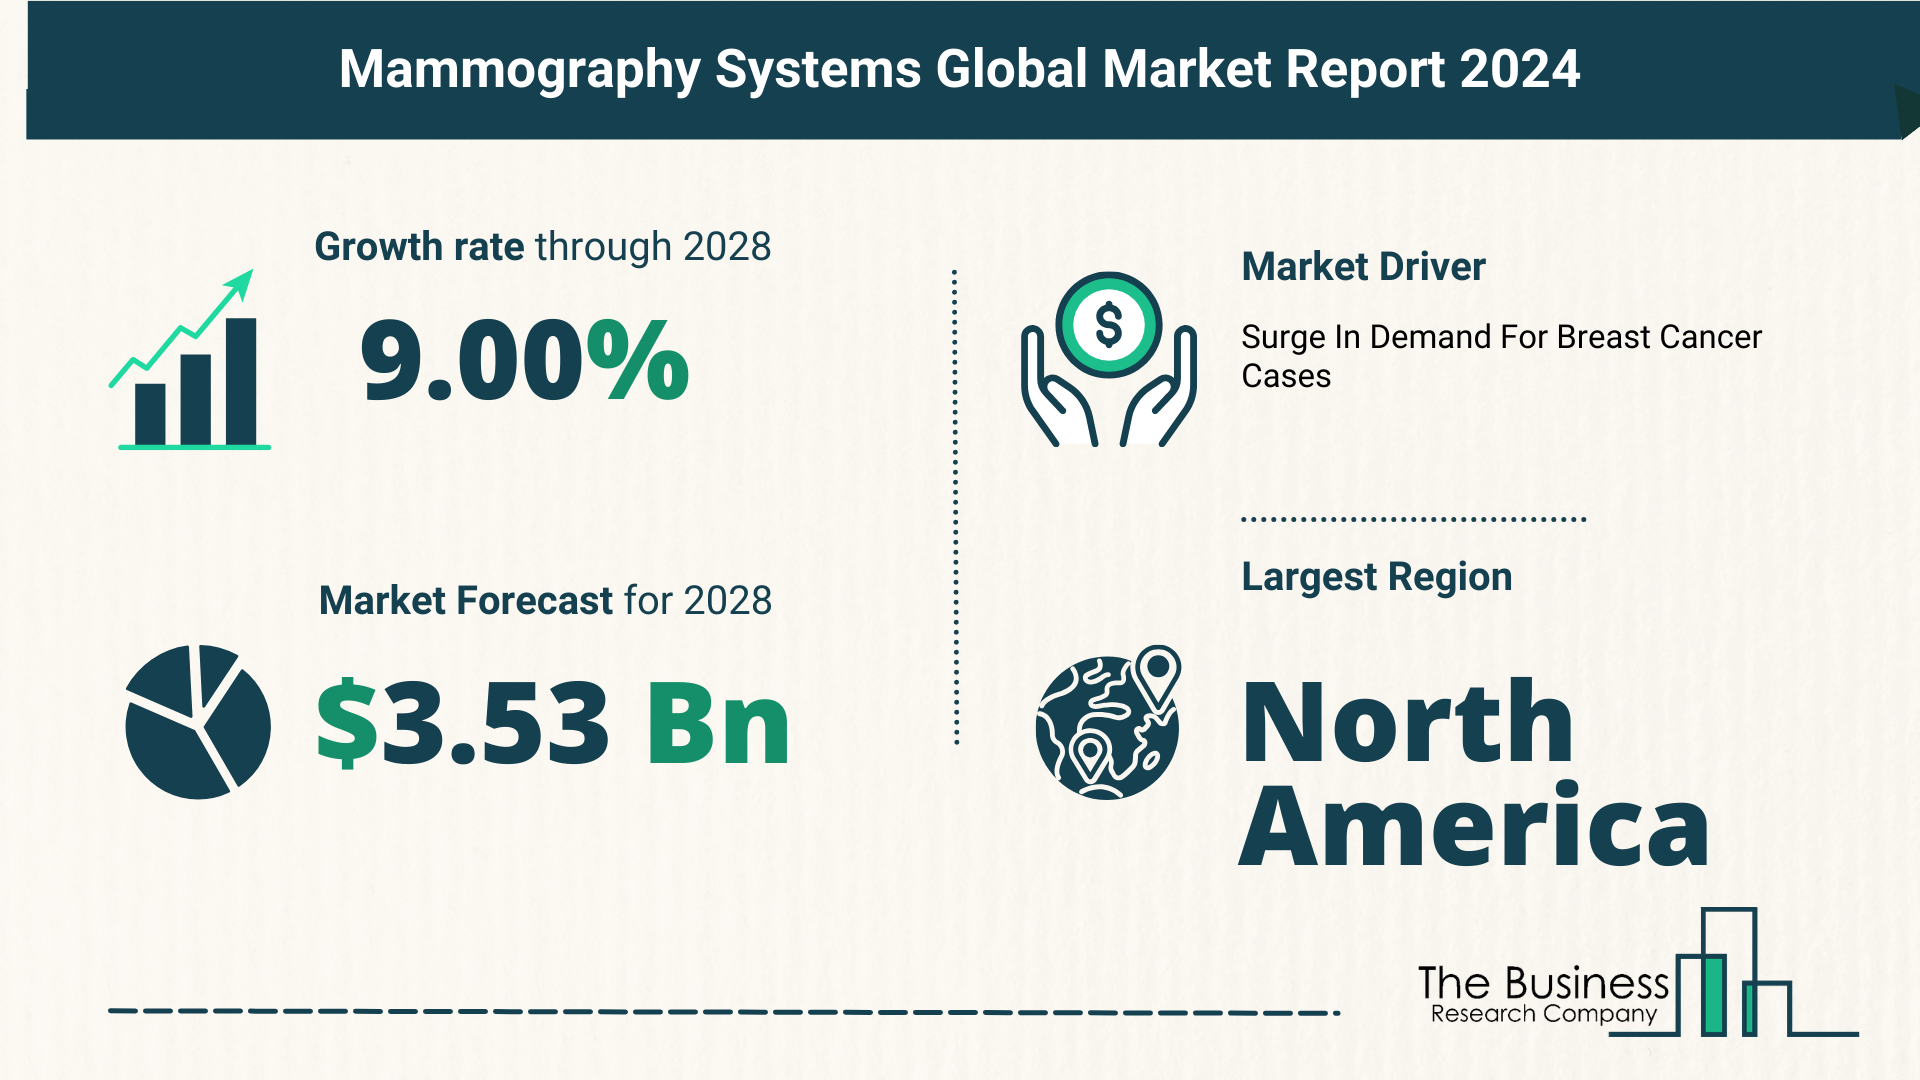 Key Trends And Drivers In The Mammography Systems Market 2024